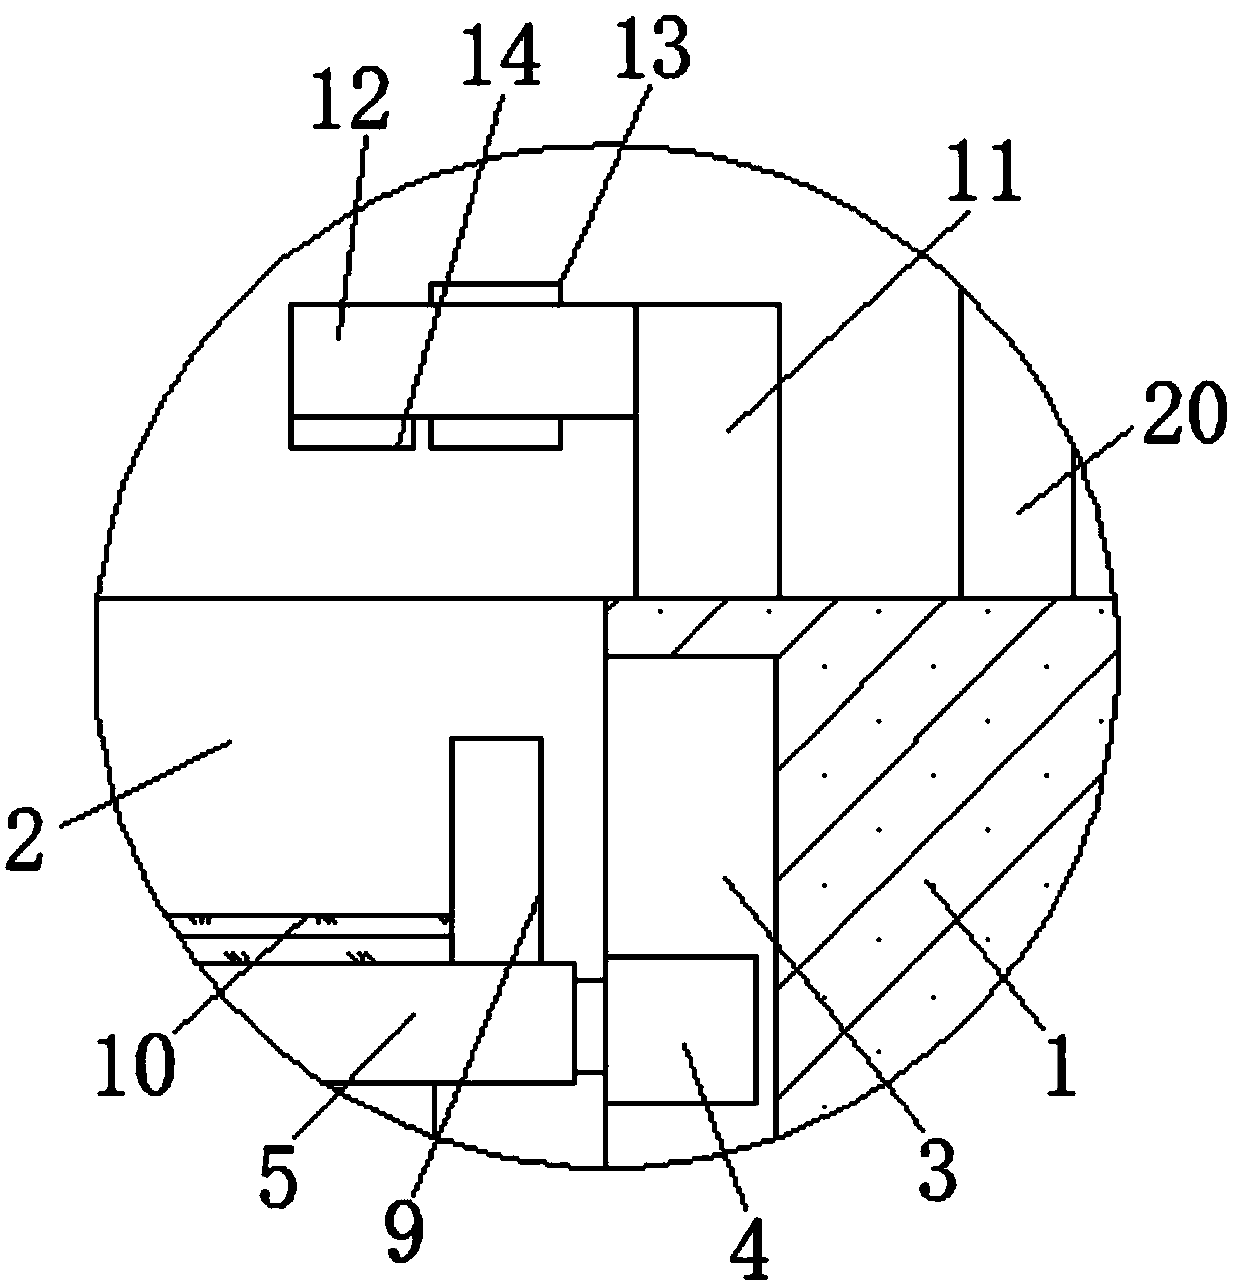 Grinding method having fixing function and used for valve machining